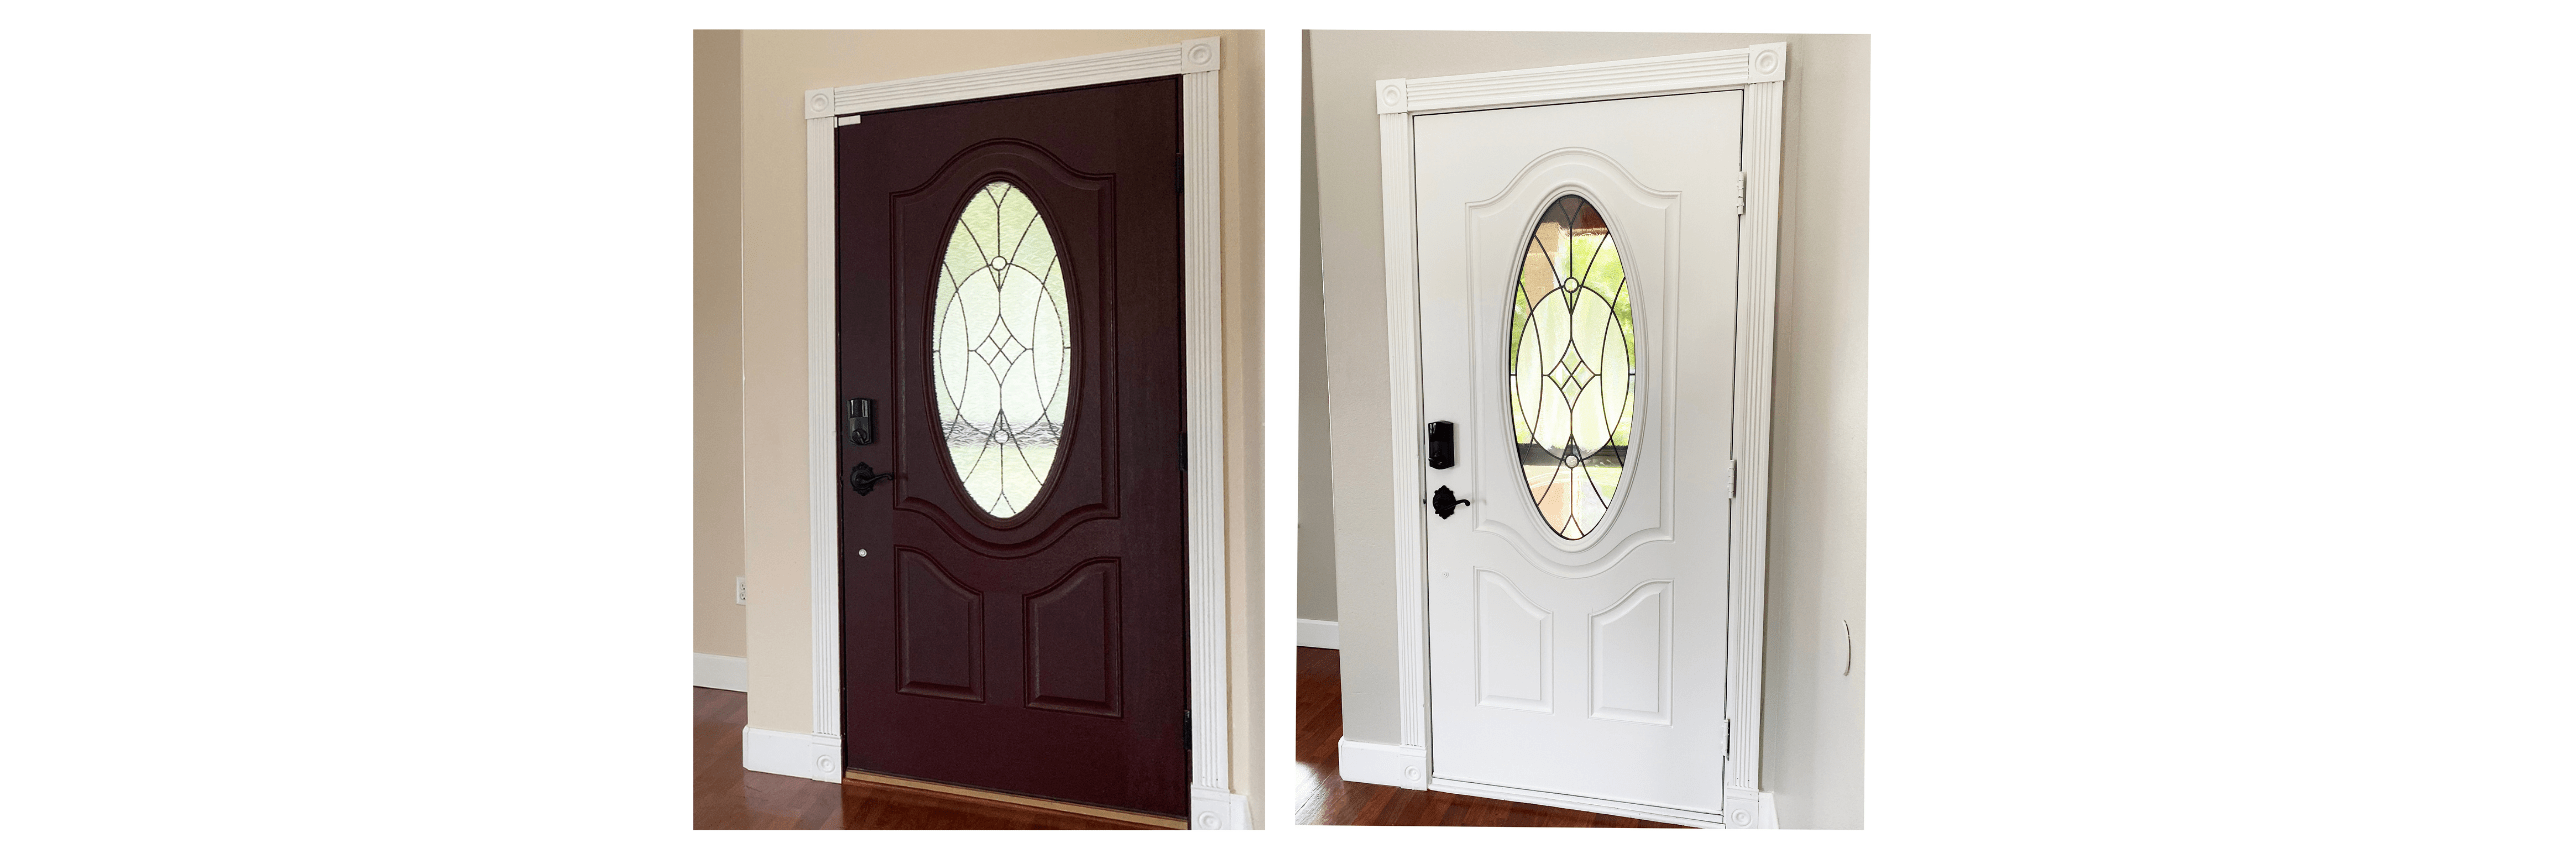 Front Door Interior Before and After Home Staging Consultation